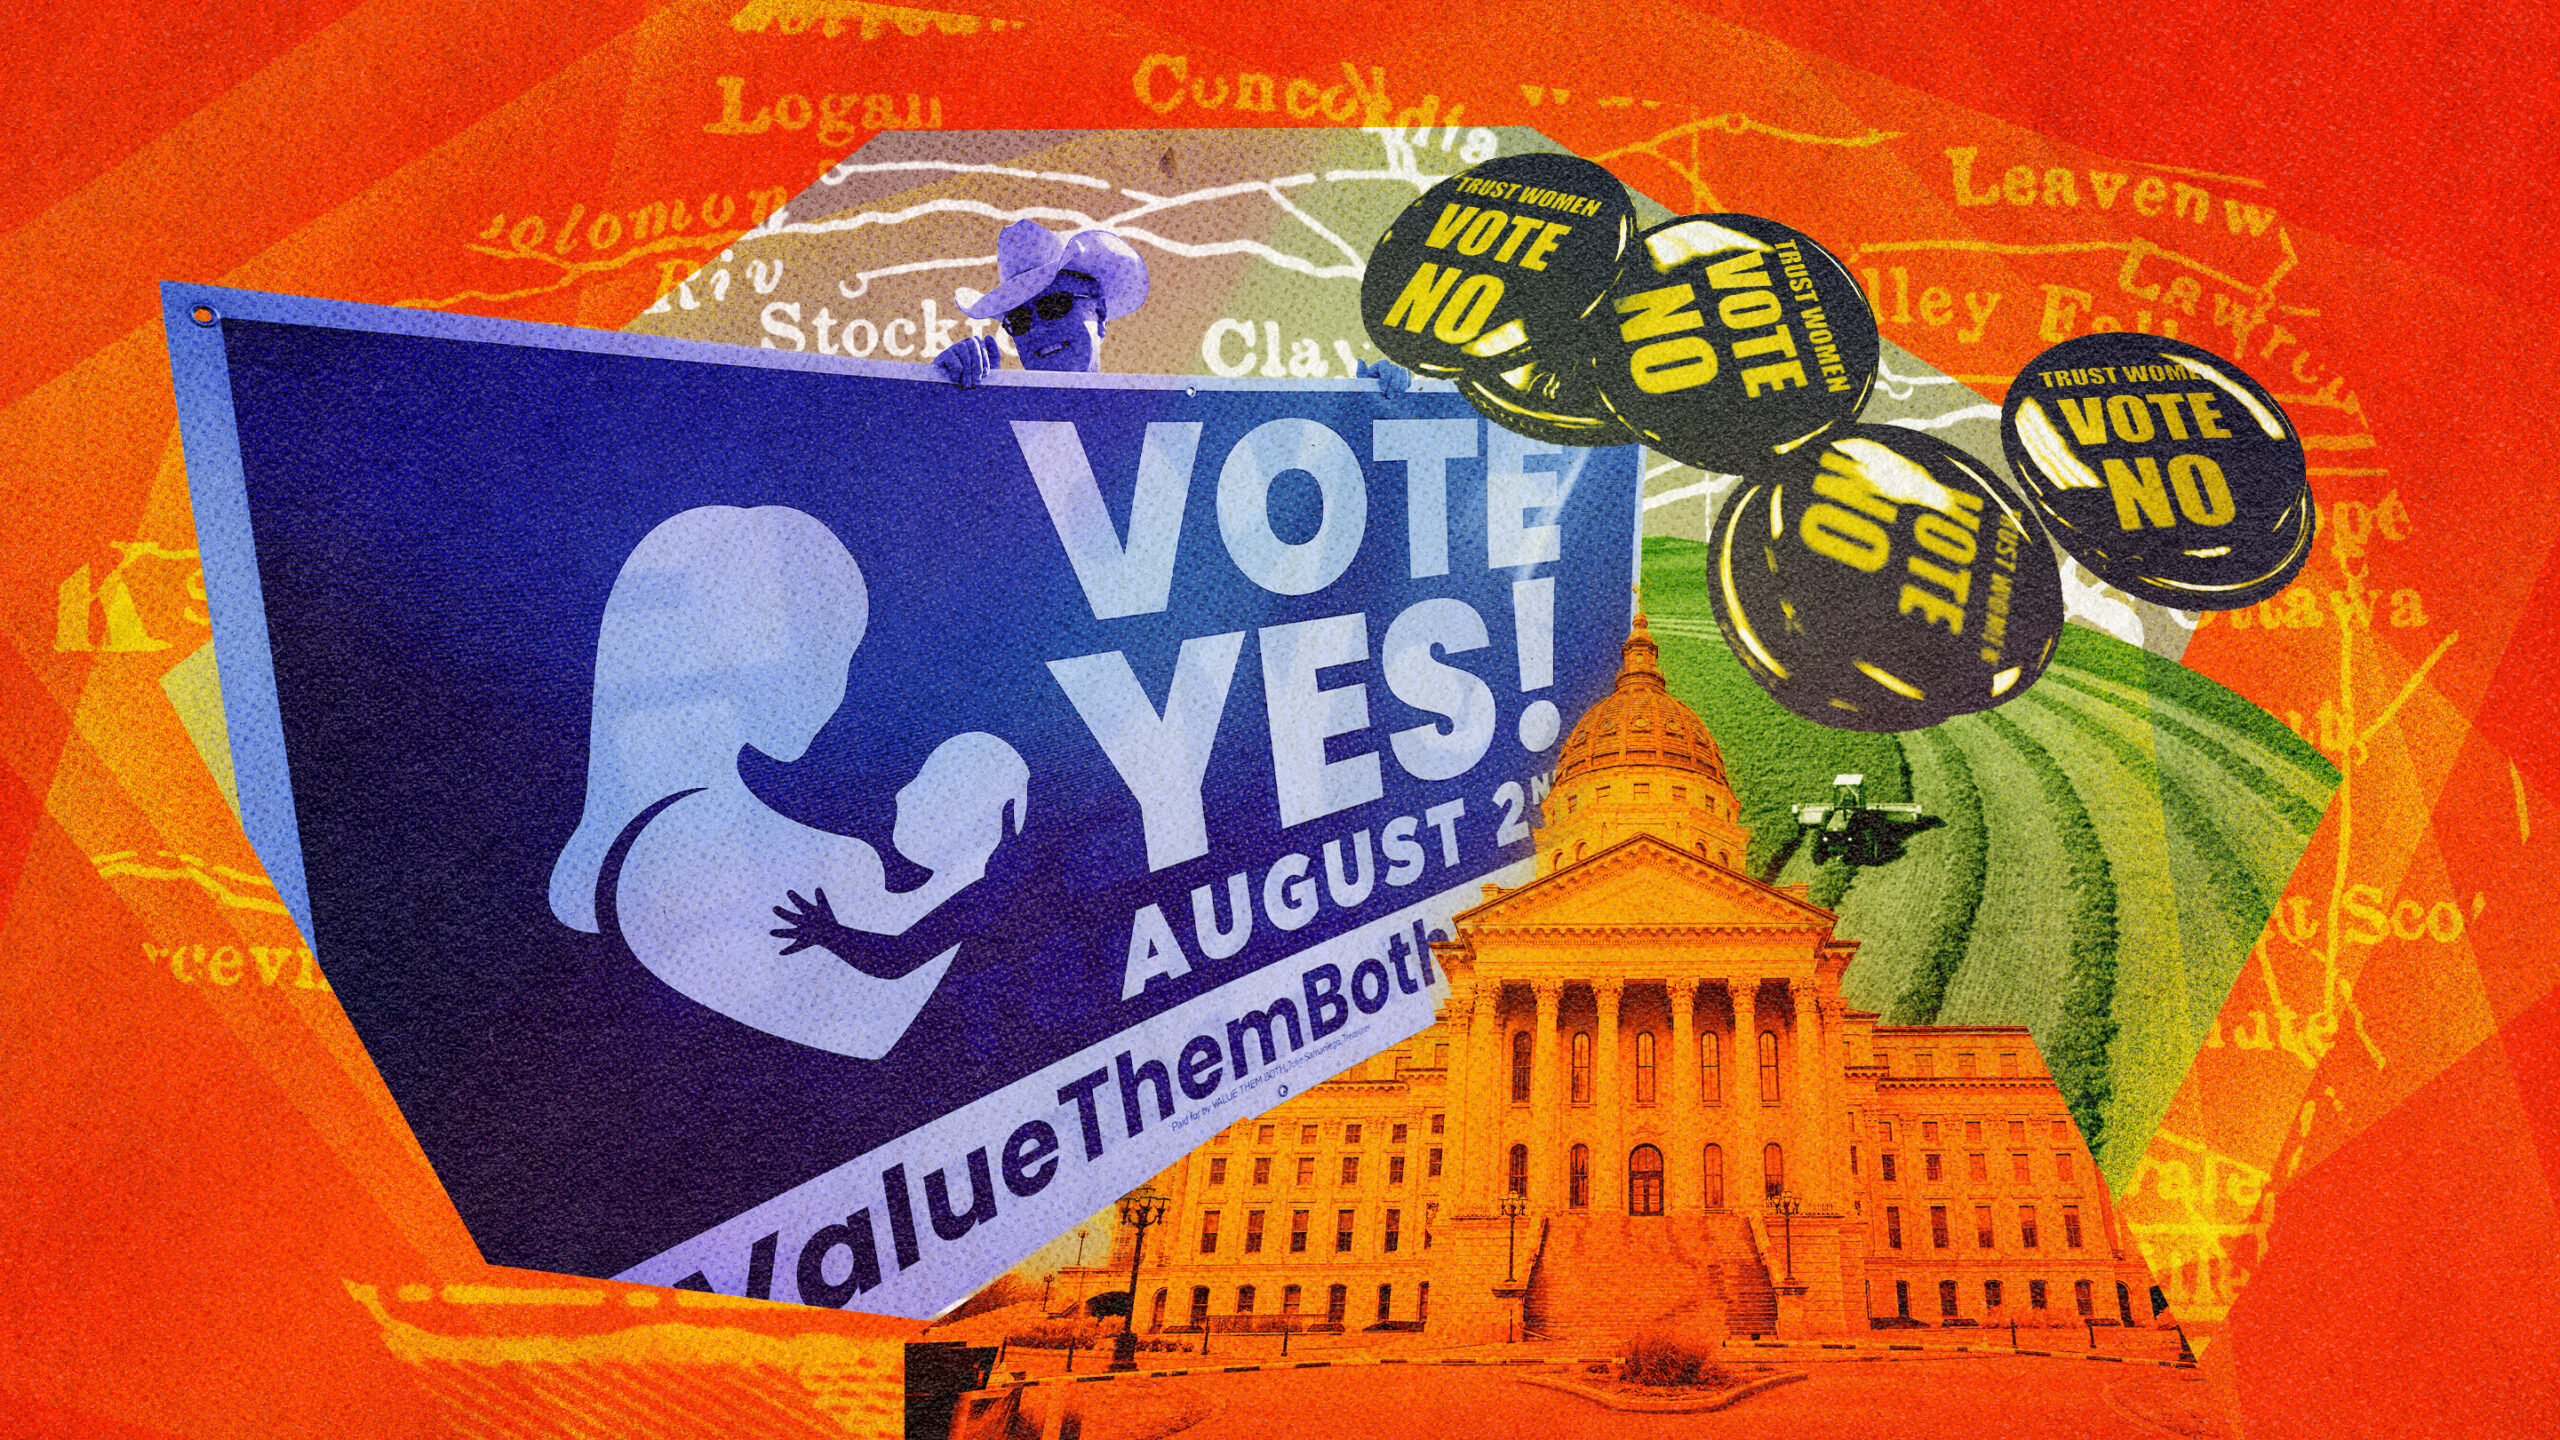 A Pro-Abortion Sleight Of Hand How Leftists Used A Disinformation Campaign To Misdirect Kansans